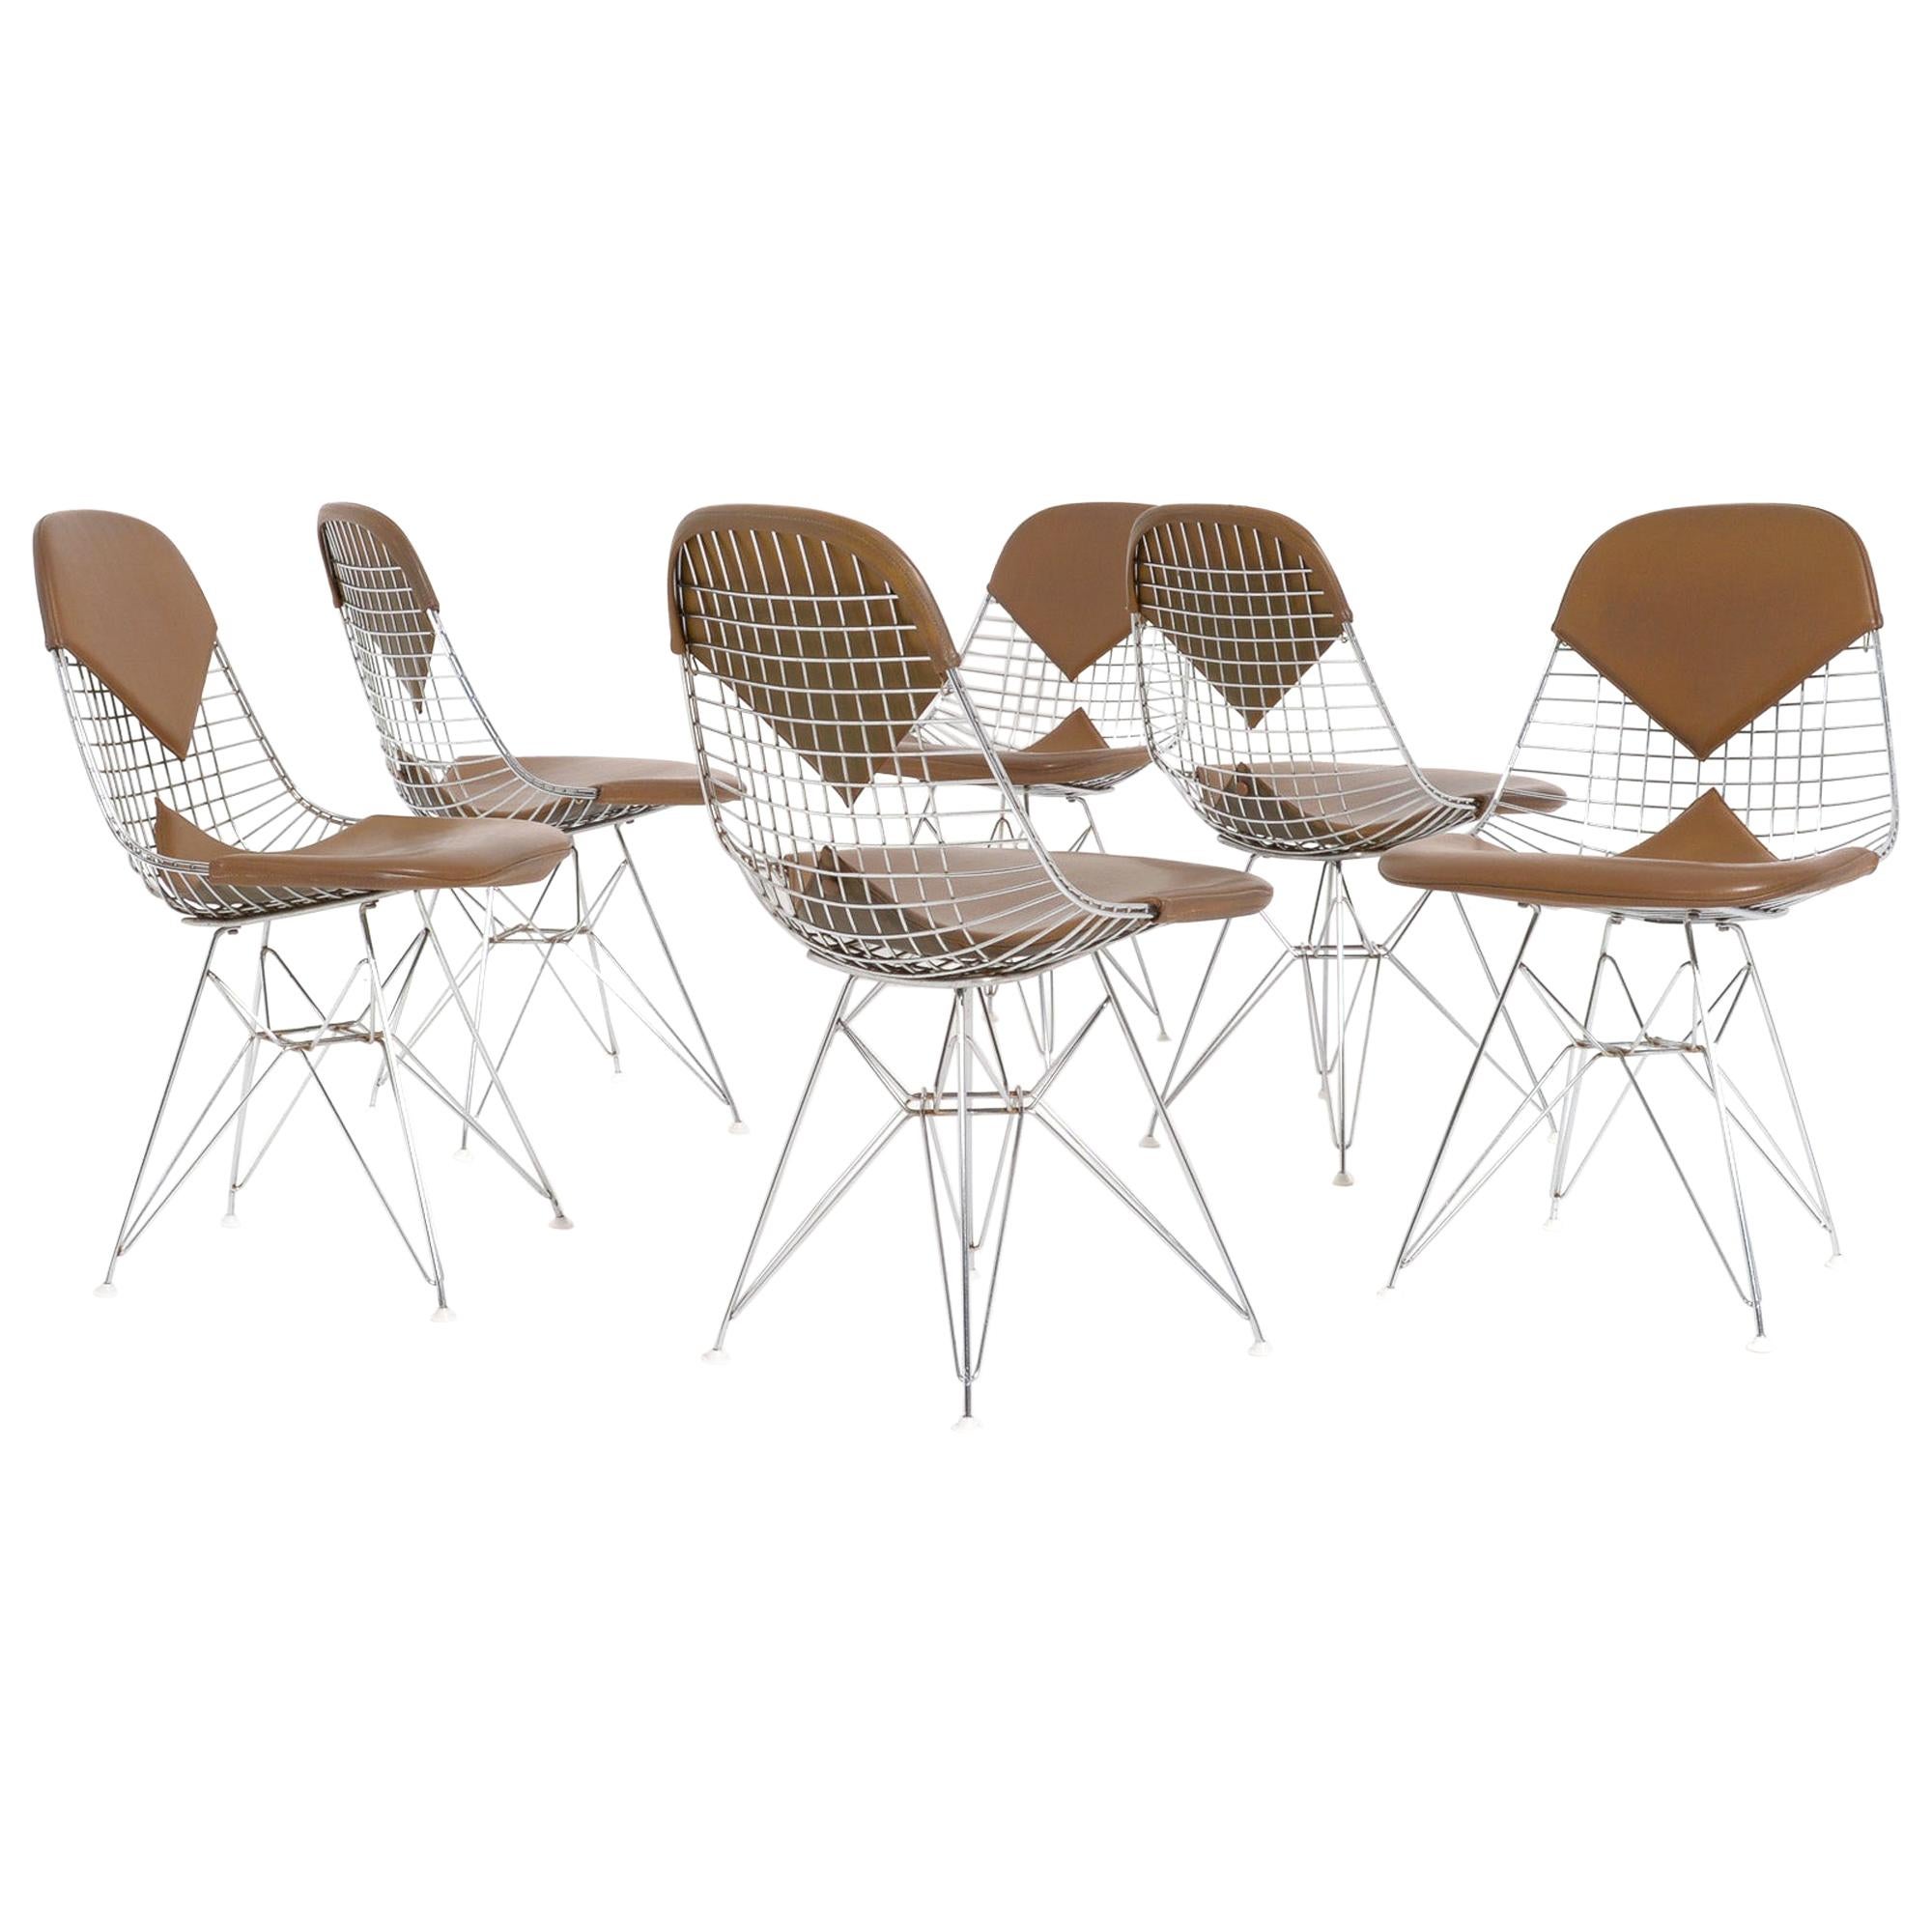 DKR Wire Chairs 'Bikini' by Eames for Herman Miller